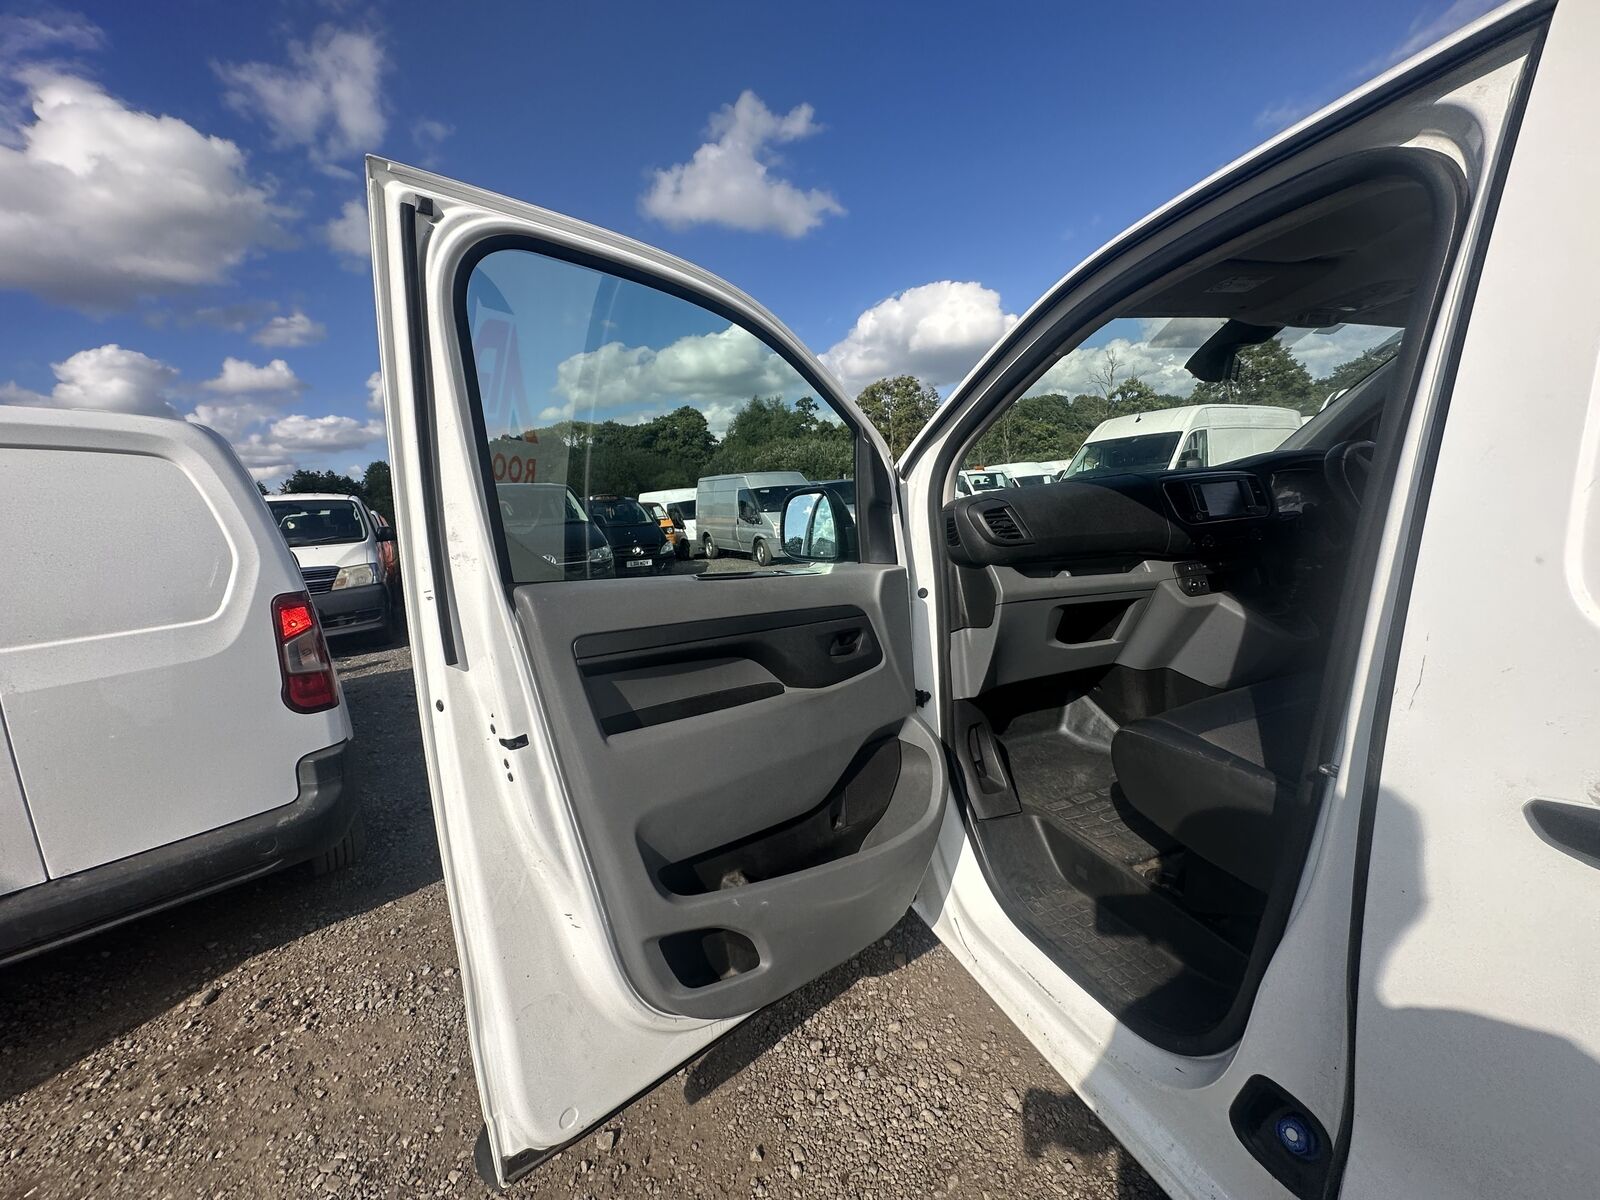 Bid on 2020 VAUXHALL VIVARO 3100 ONLY 31K MILES - A/C - CRUISE CONTROL - PARKING SENSORS- Buy &amp; Sell on Auction with EAMA Group